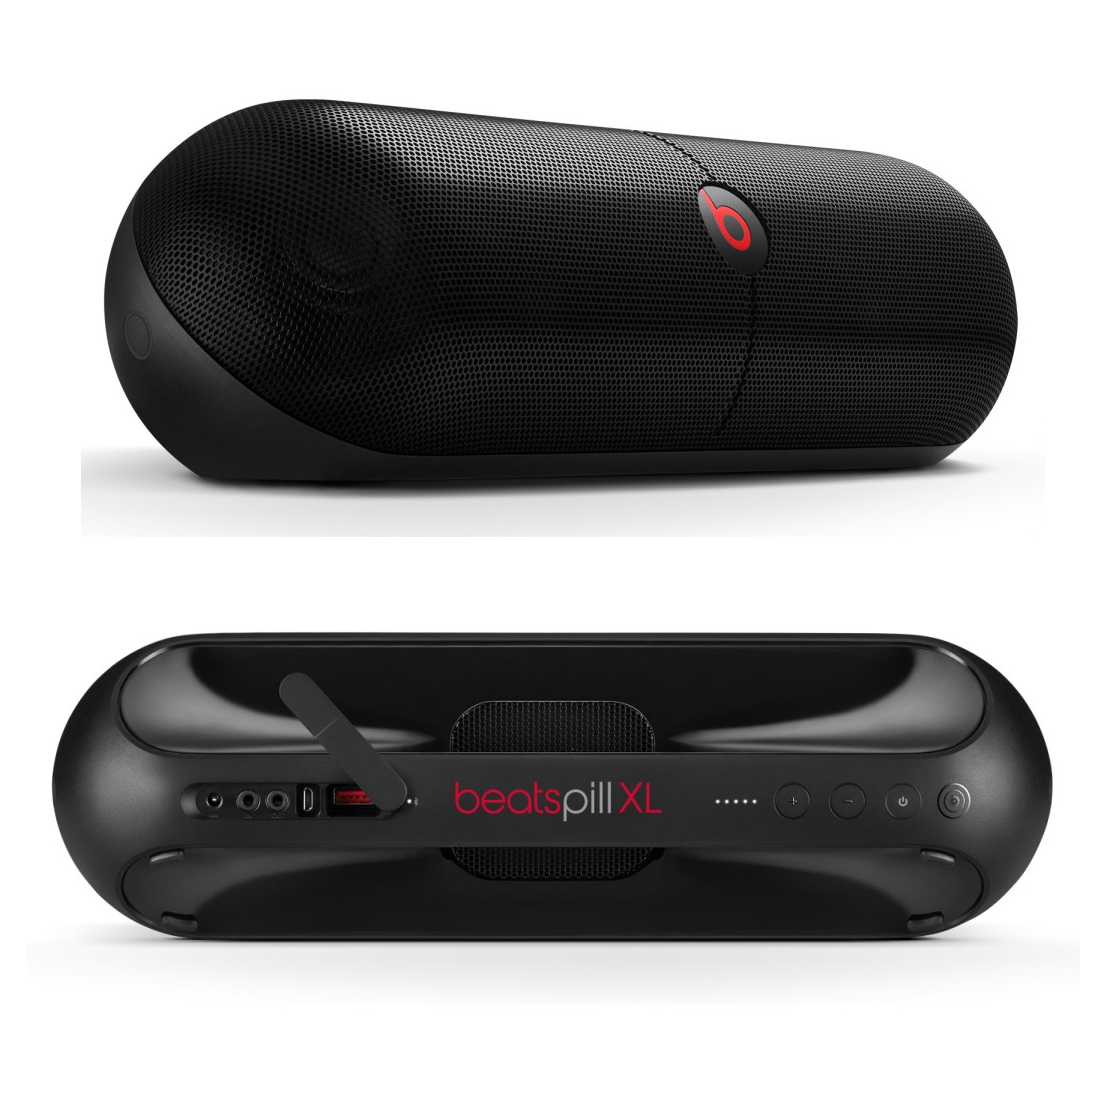 beats-new-pill-and-the-new-pill-xl-speakers-with-nfc-and-bluetooth-400284-2.jpg